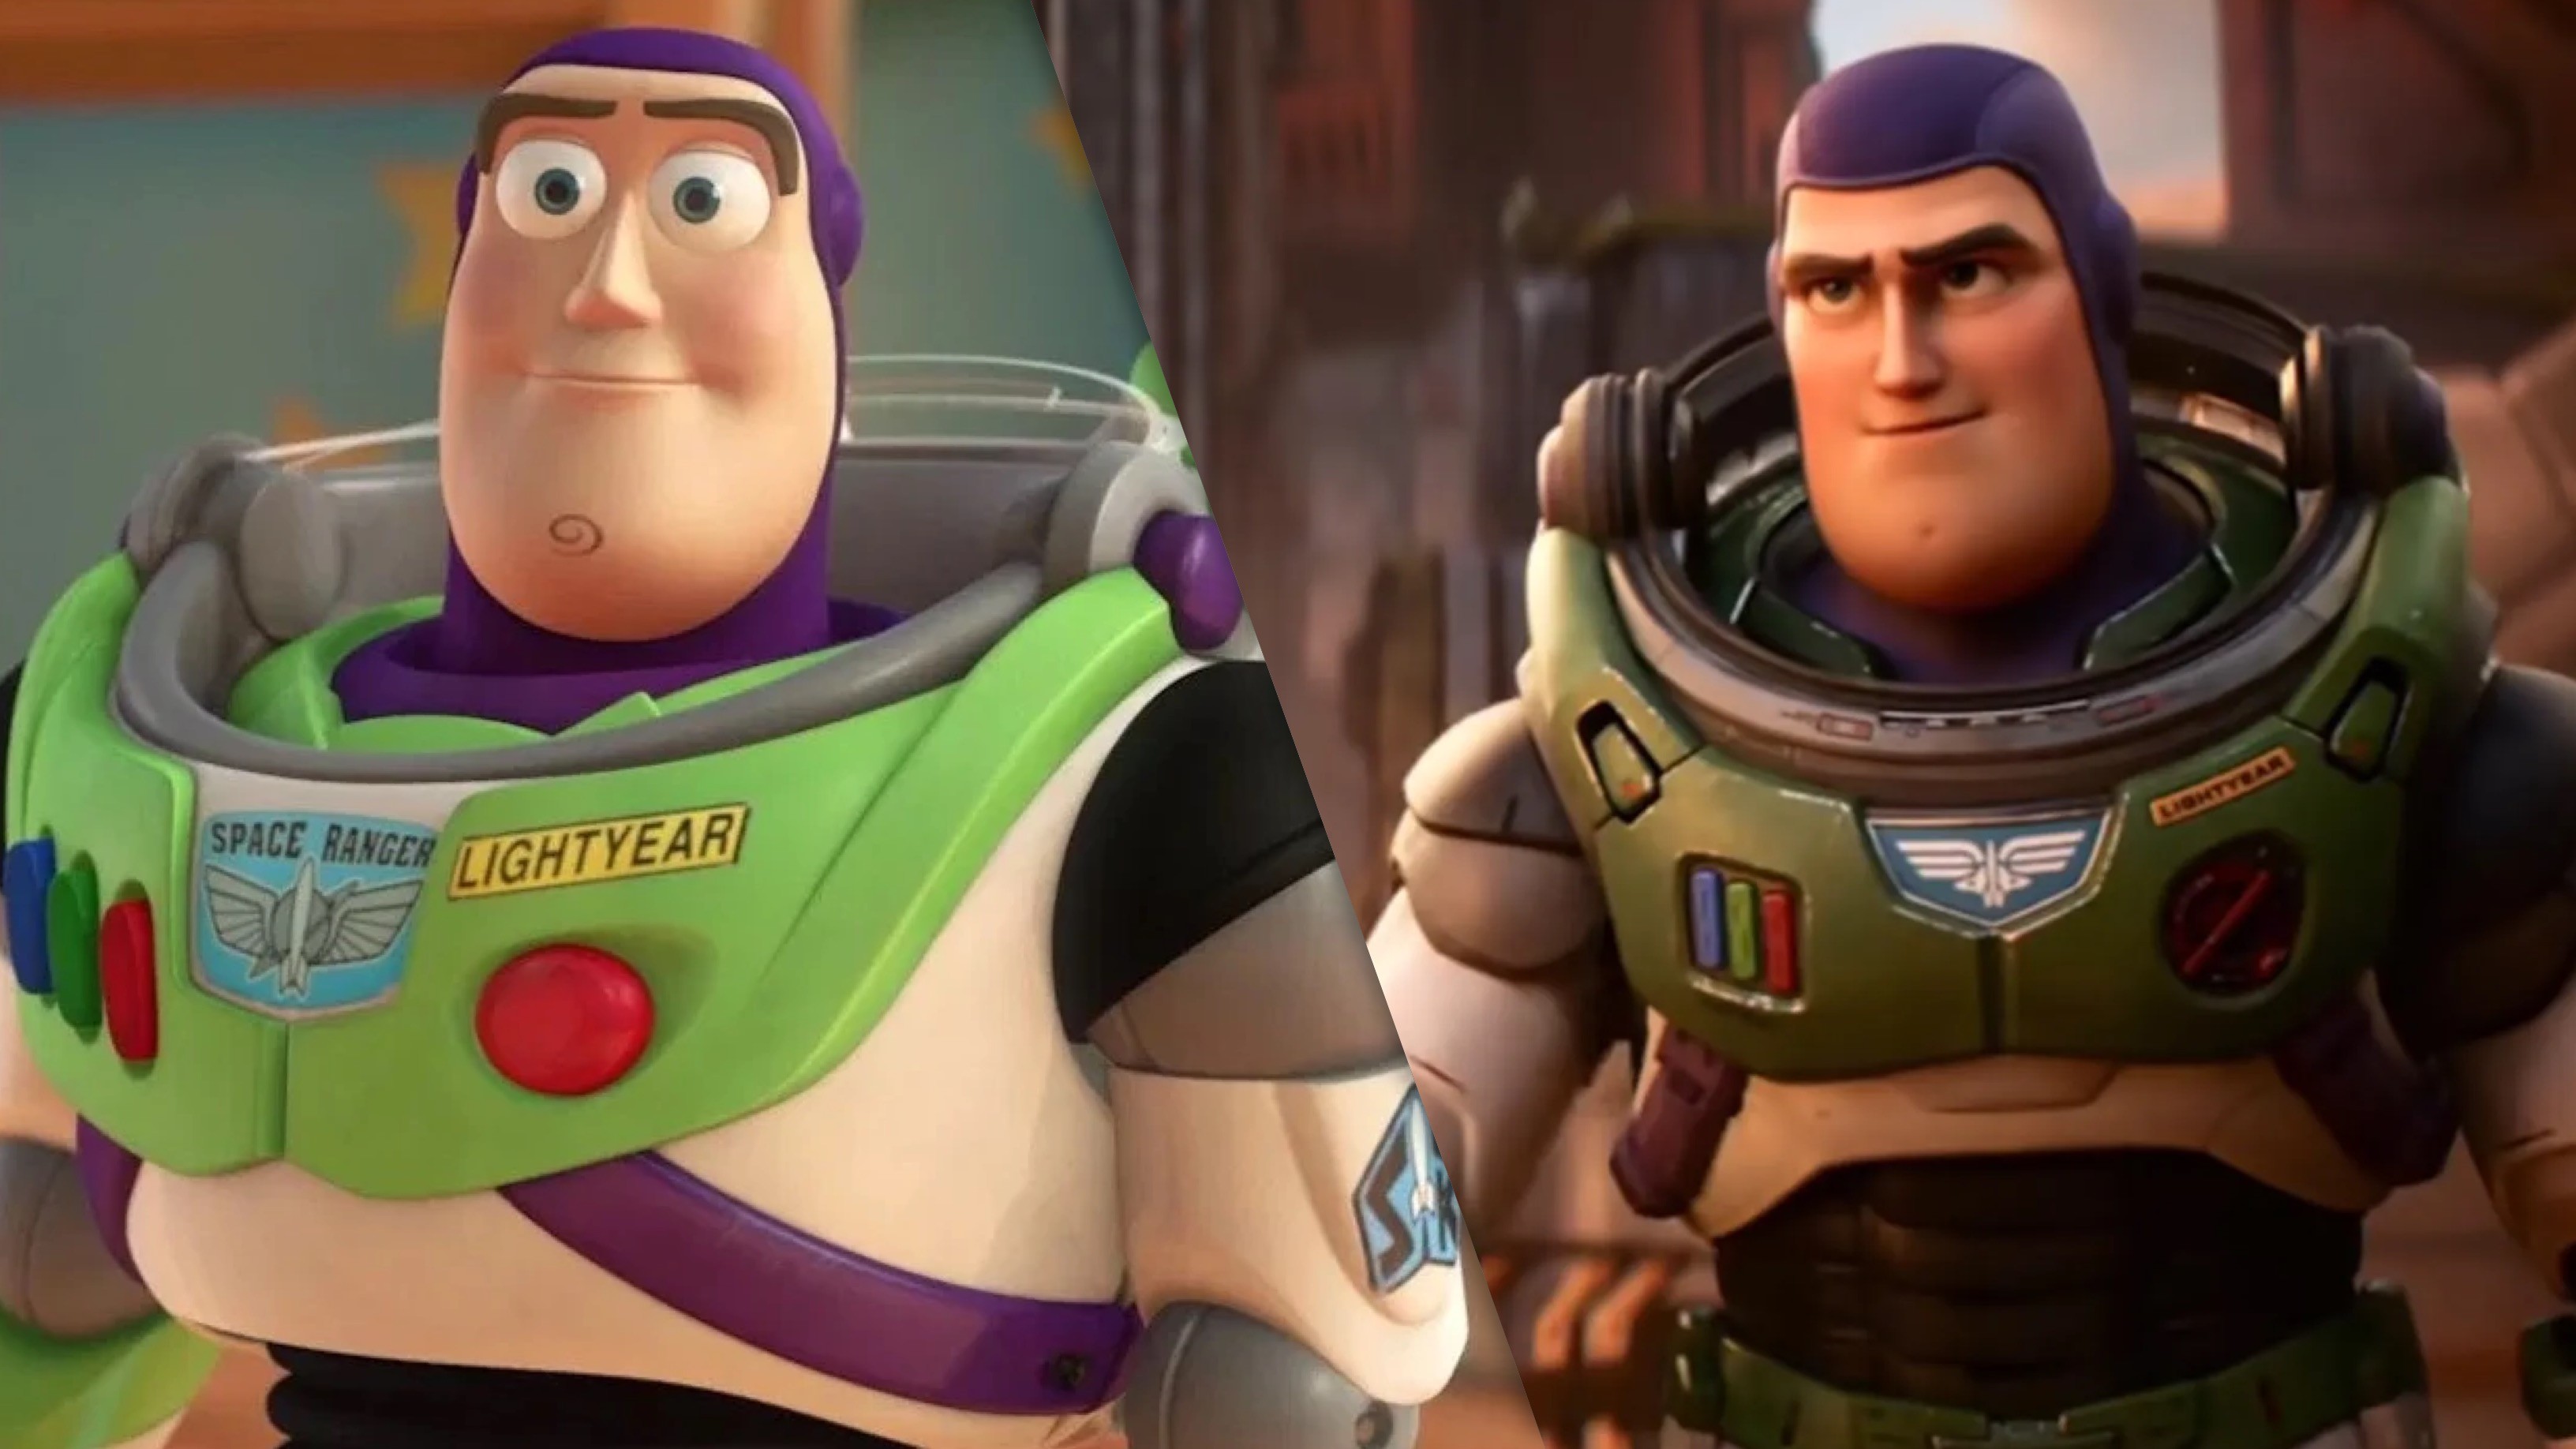 ‘Lightyear’ is a Movie Set Within The ‘Toy Story’ Franchise